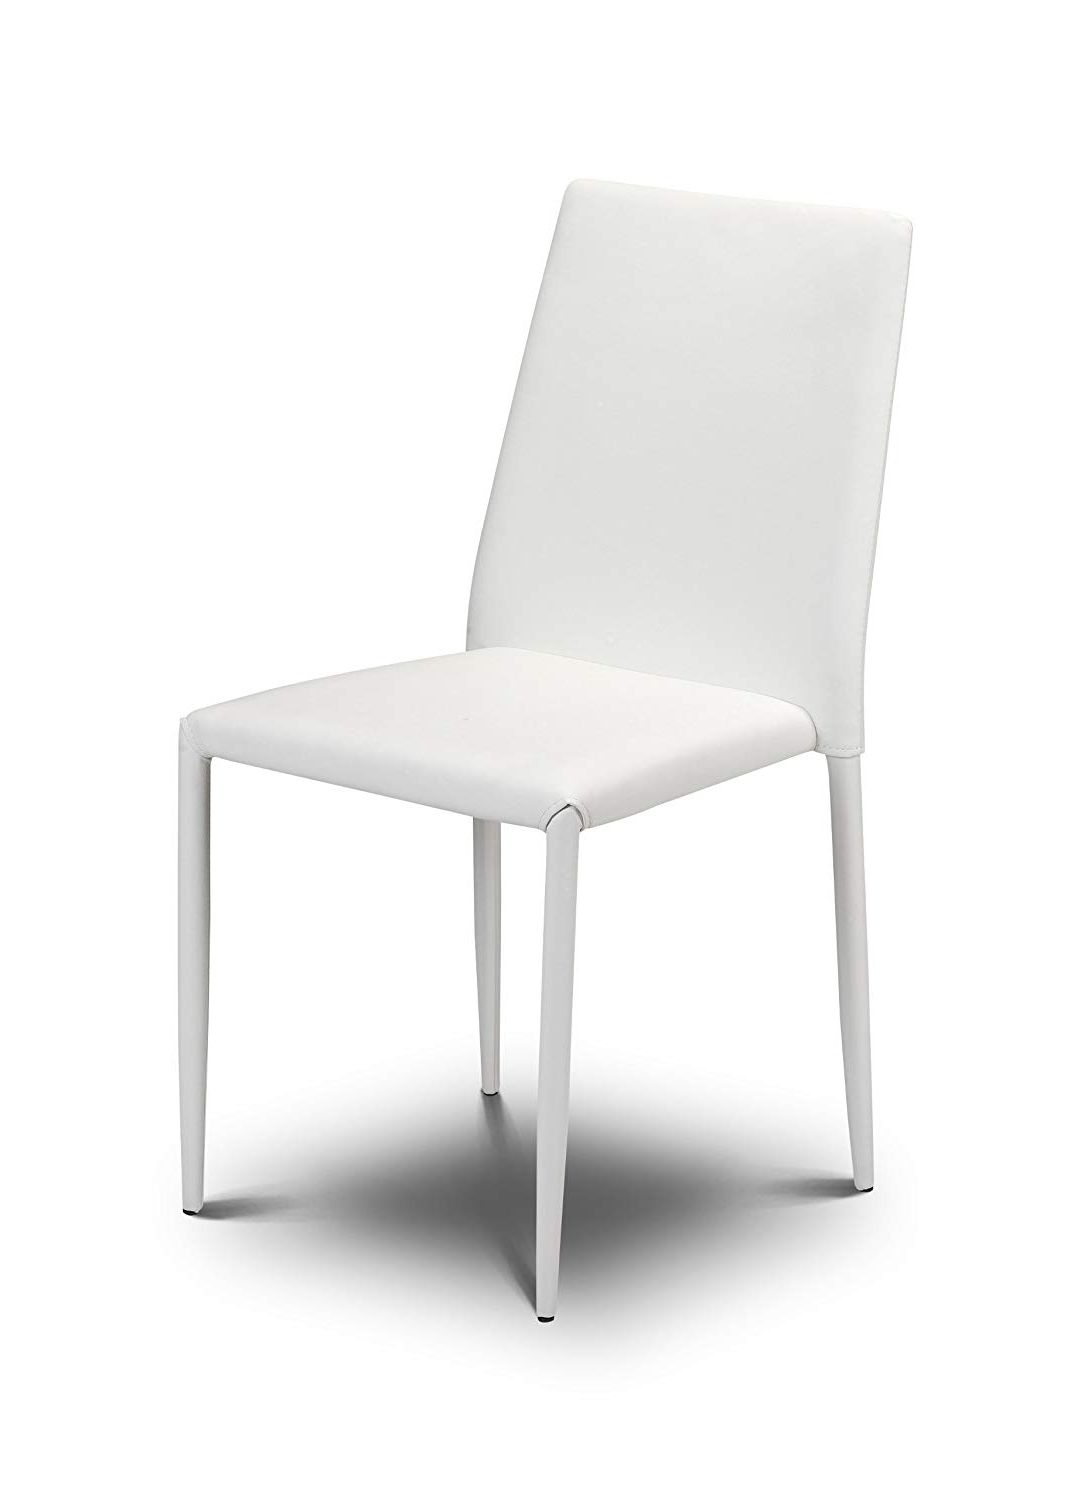 Mandy Paper White Side Chairs Within Most Current Julian Bowen Jazz Stacking Chairs, Faux Leather, White, Set Of 4 (Photo 3 of 20)